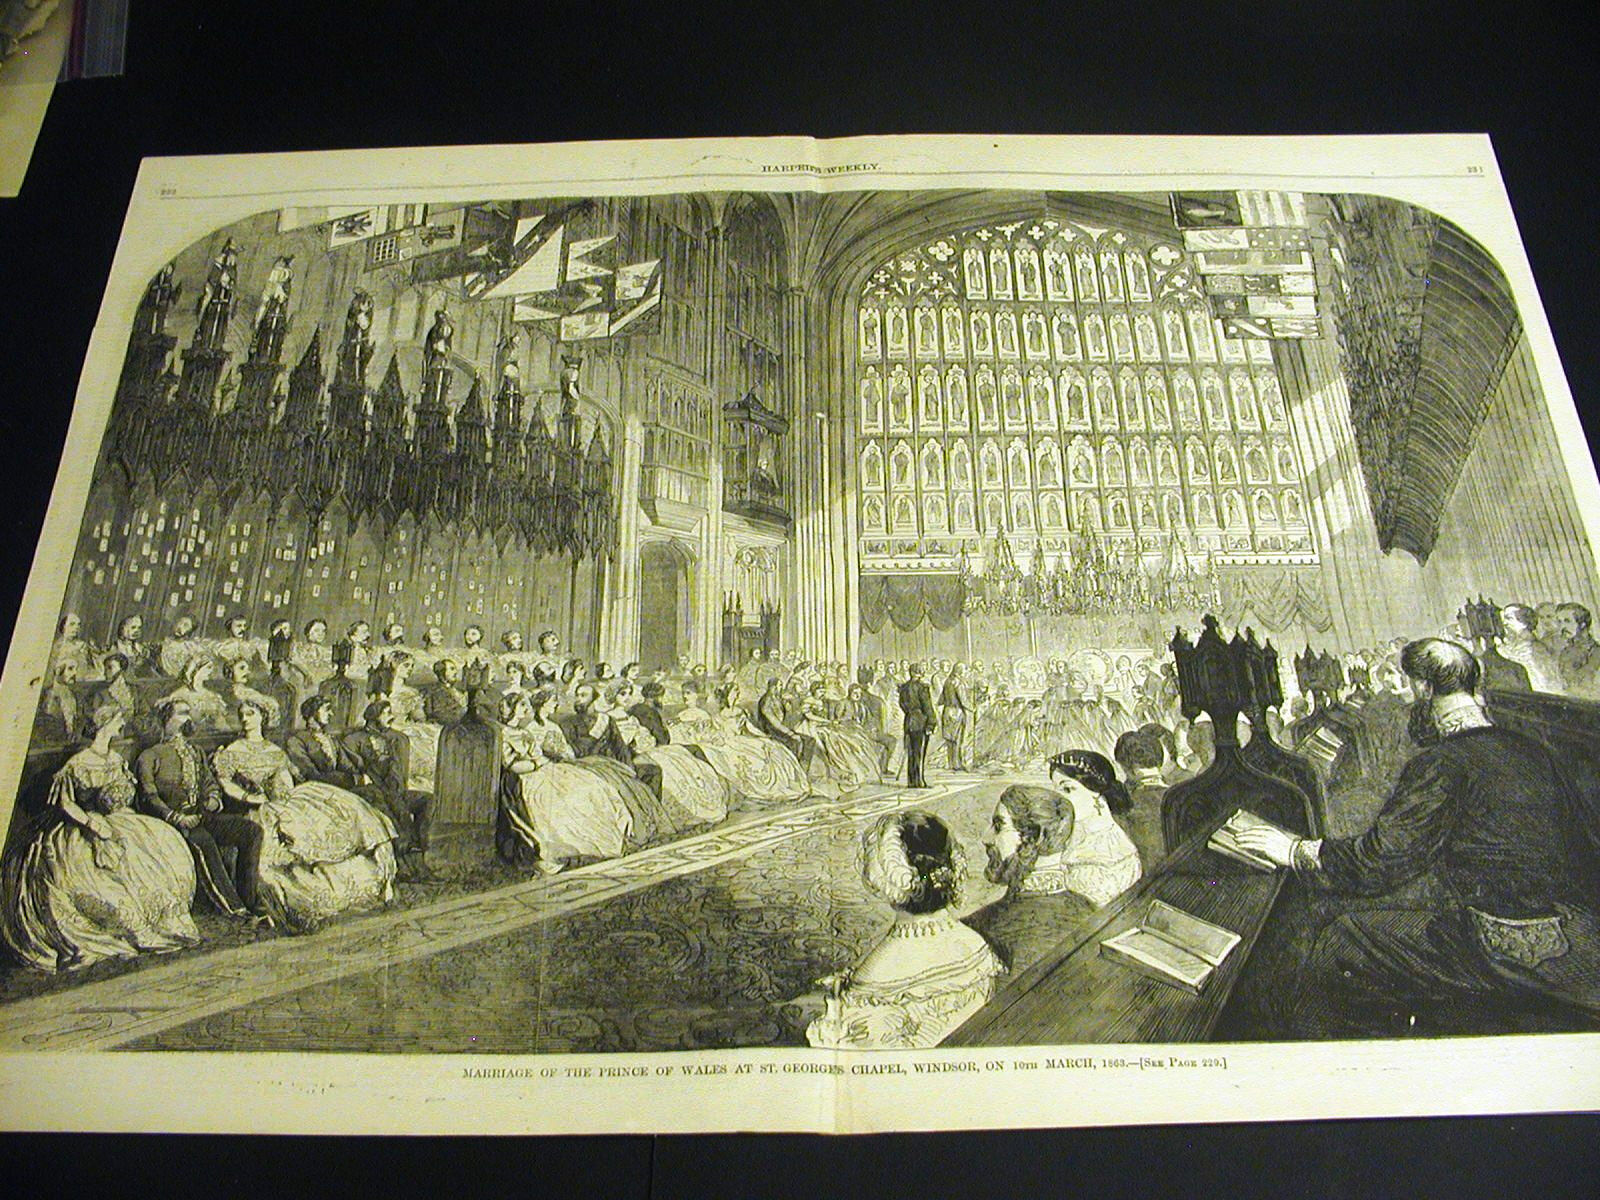 Marriage Prince of Wales ST. GEORGES CHAPEL Windsor England 1863 Large Print